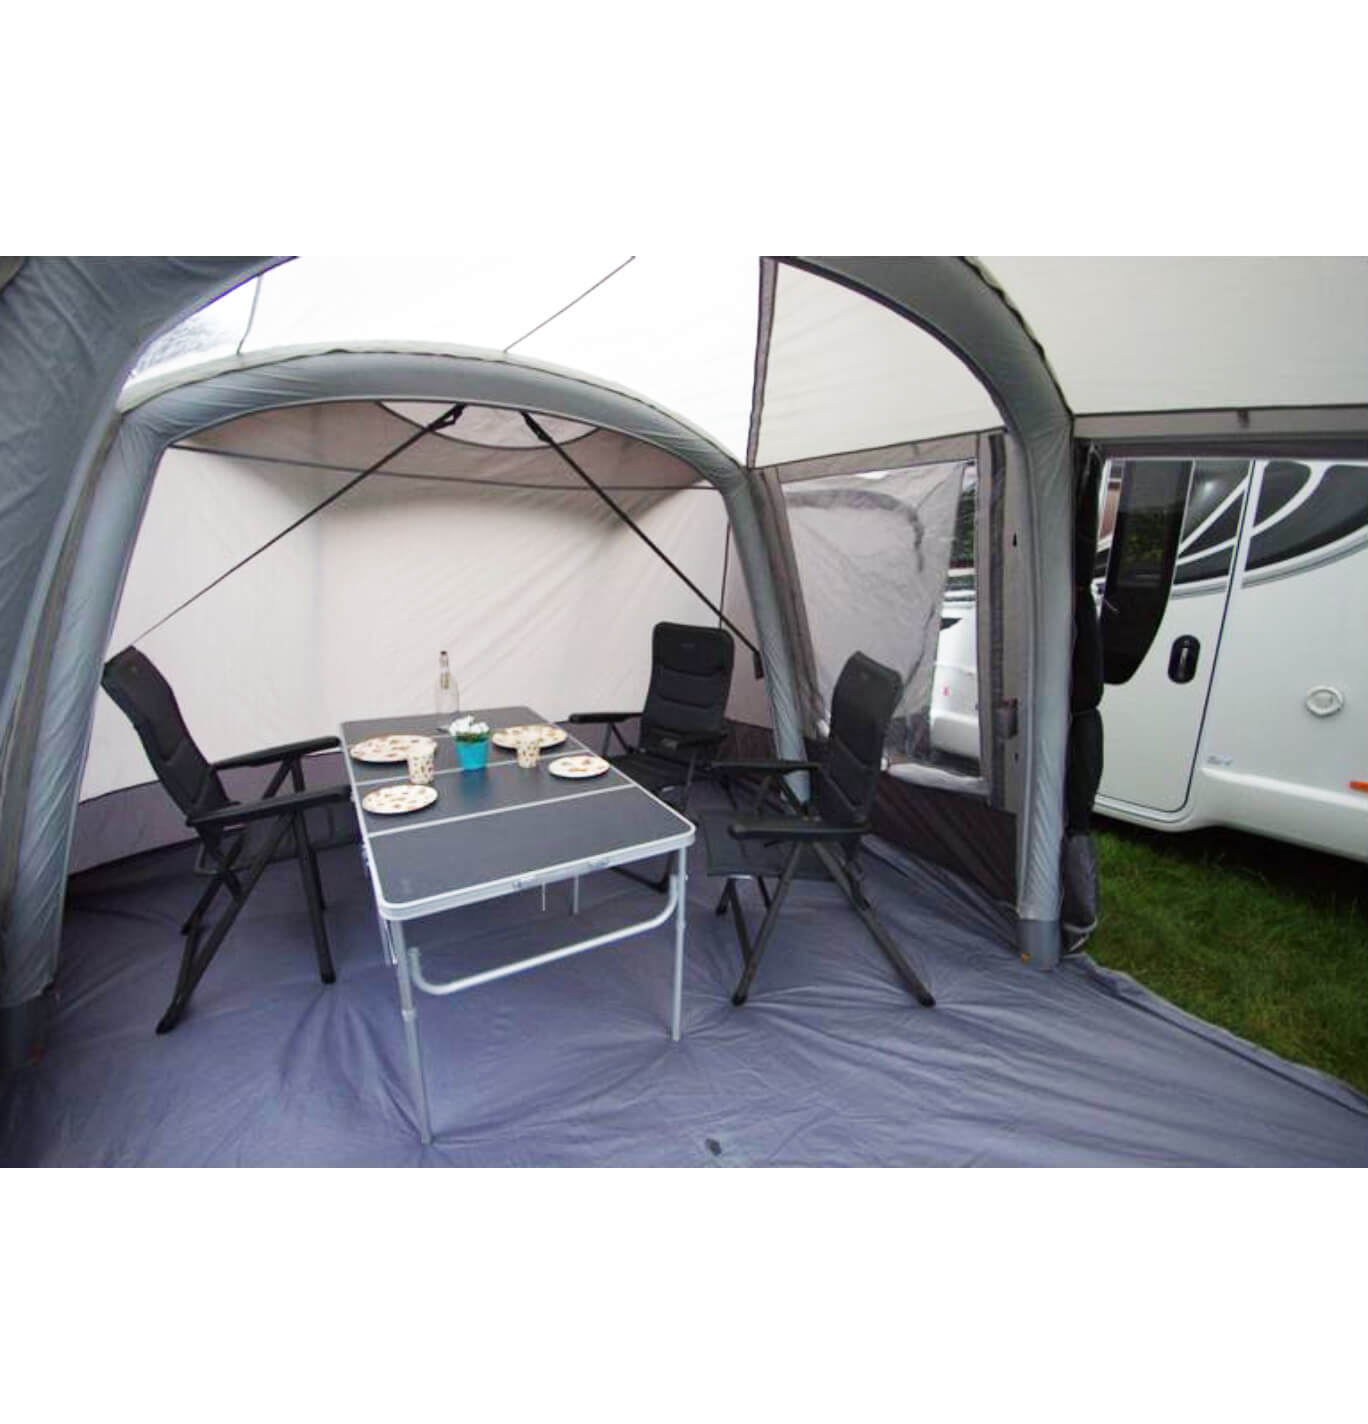 Inside the Galli awning with furniture pitched